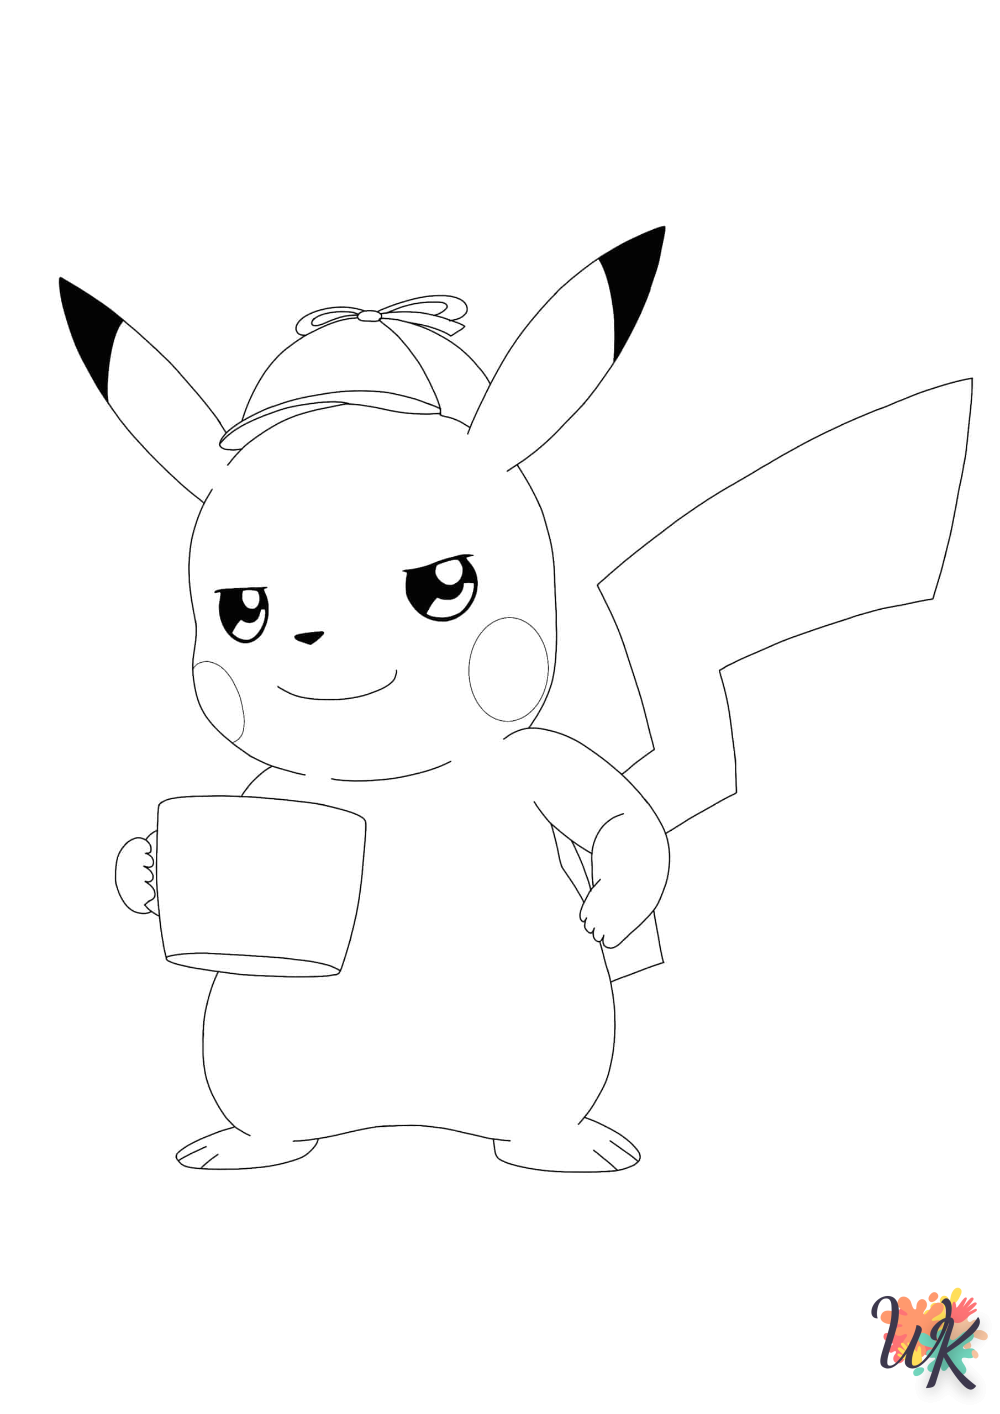 Pikachu coloring pages easy